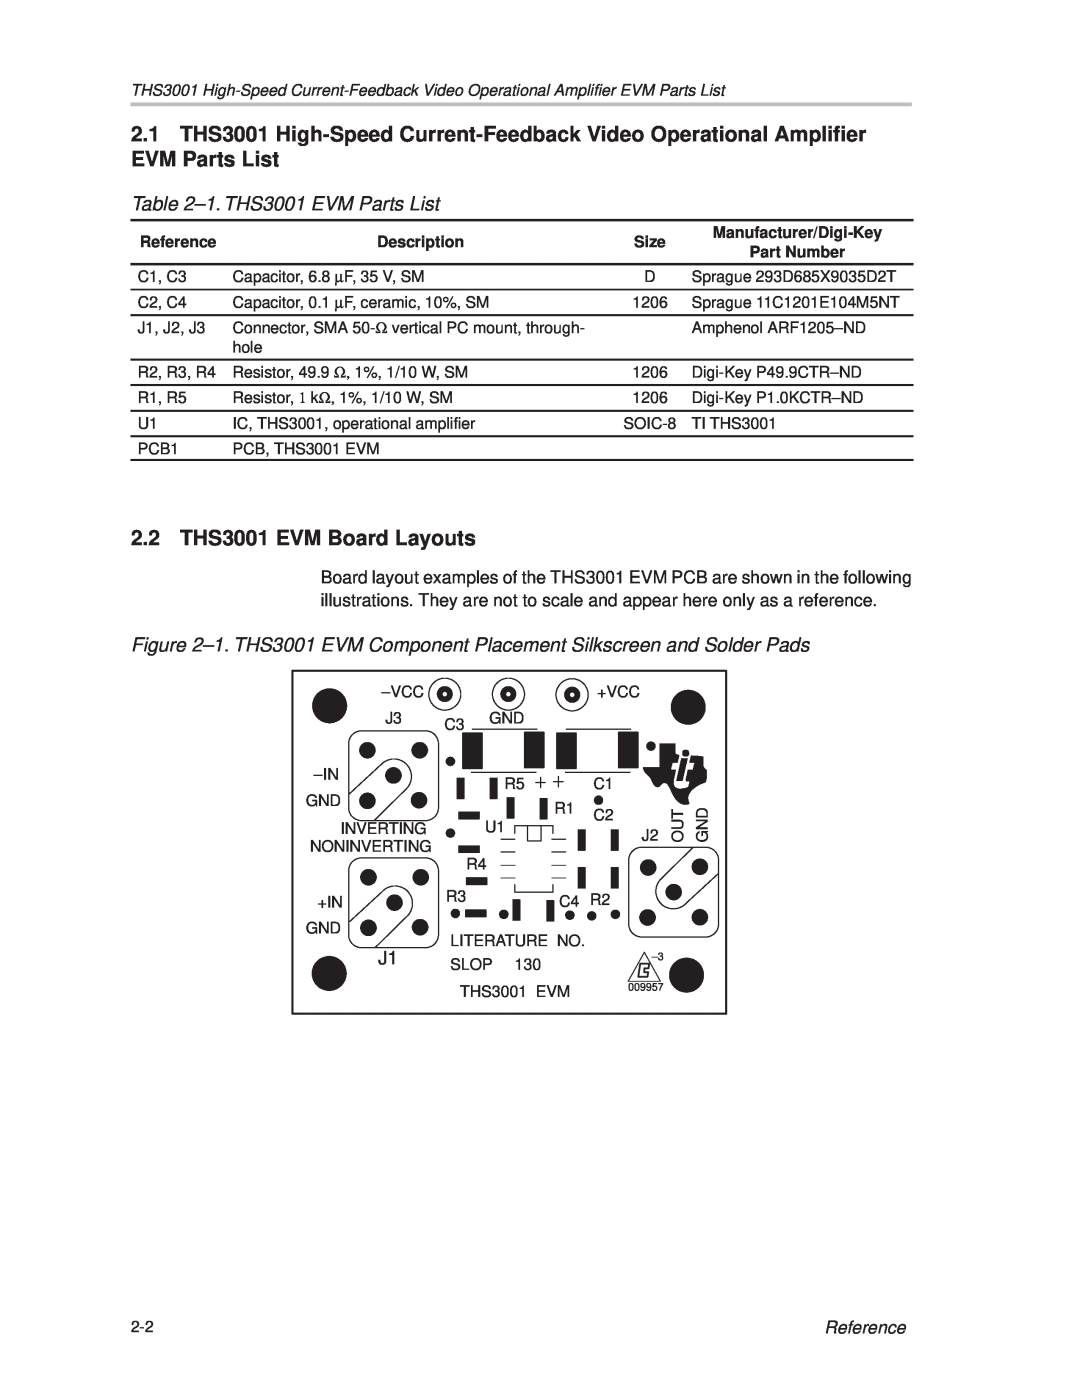 Texas Instruments manual 2.2 THS3001 EVM Board Layouts, ±1. THS3001 EVM Parts List, Reference 